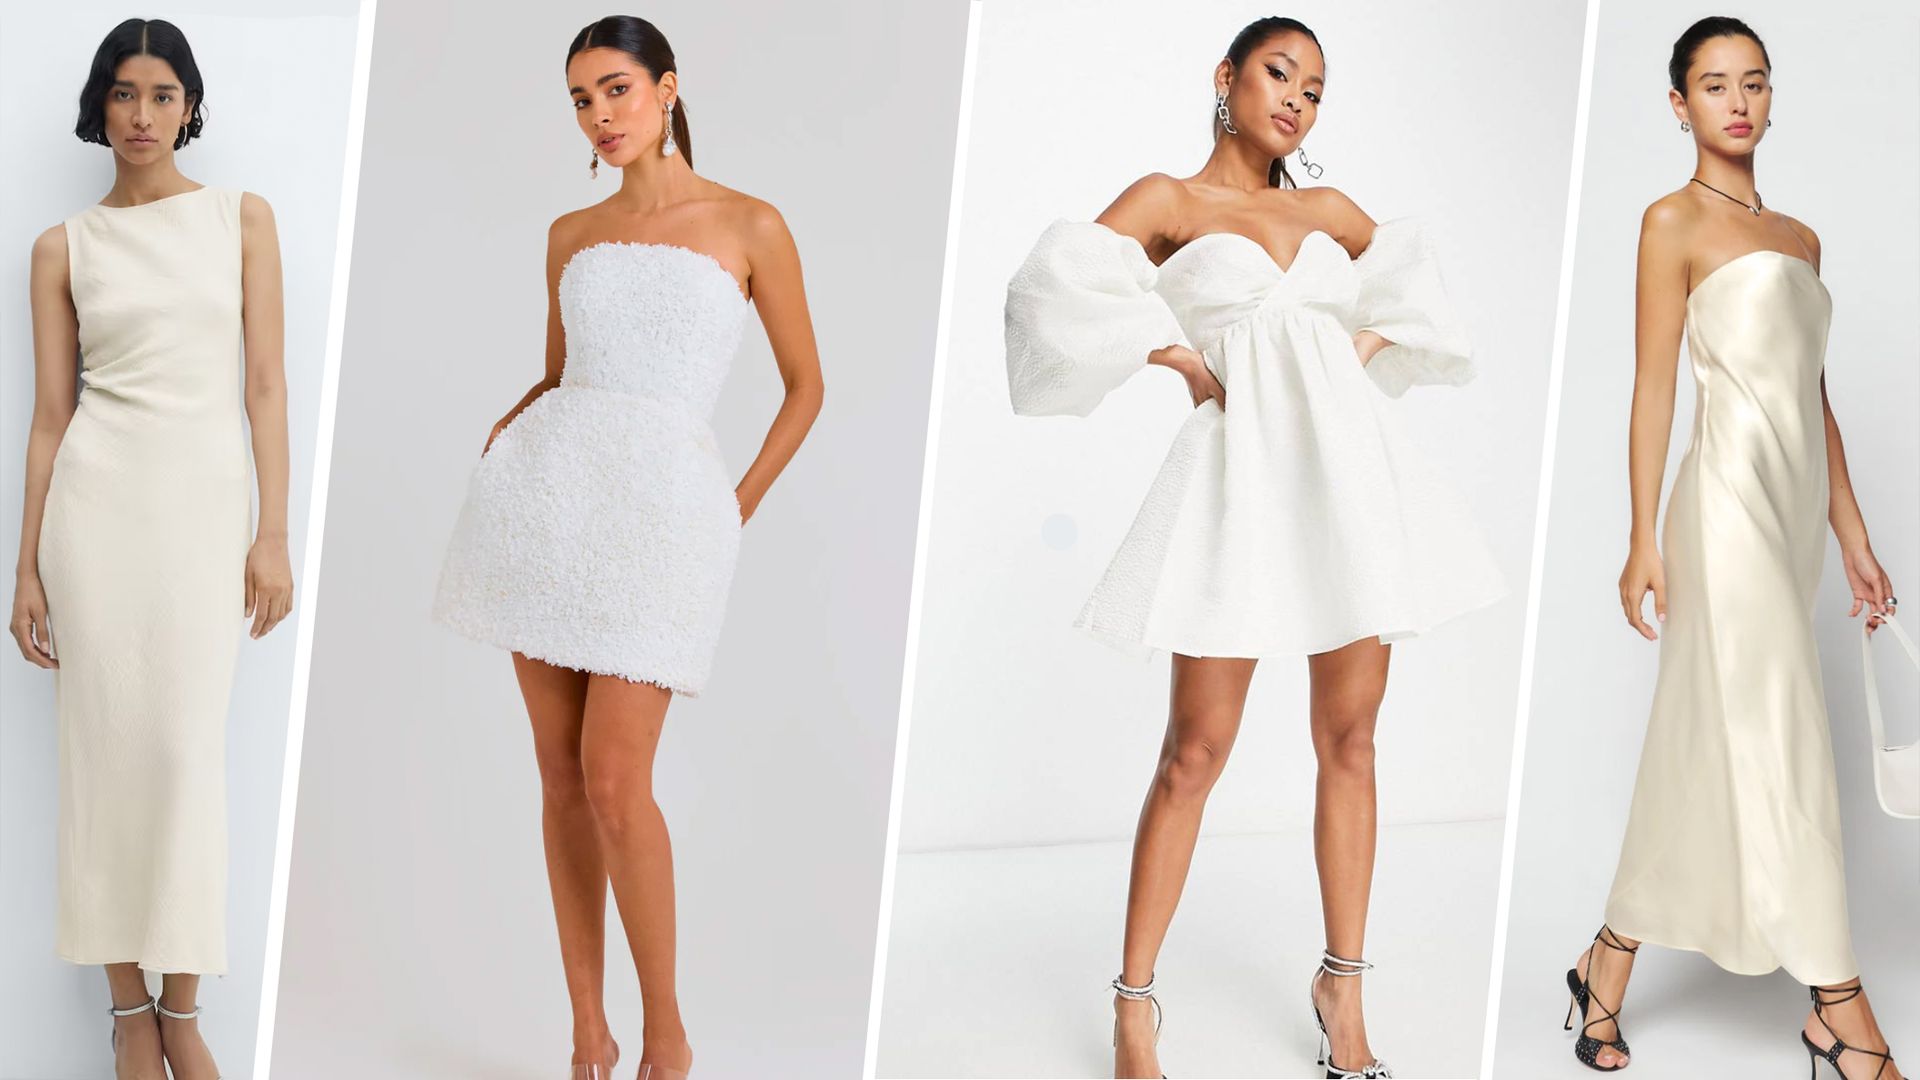 Long Sleeve Lace Applique Cocktail Party Dress For Women White Formal  Evening Gown Short With Beaded Fluffy Skirt And Short Prom Dress Dubai  Arabic Aso Ebi CL1691 From Allloves, $89.39 | DHgate.Com